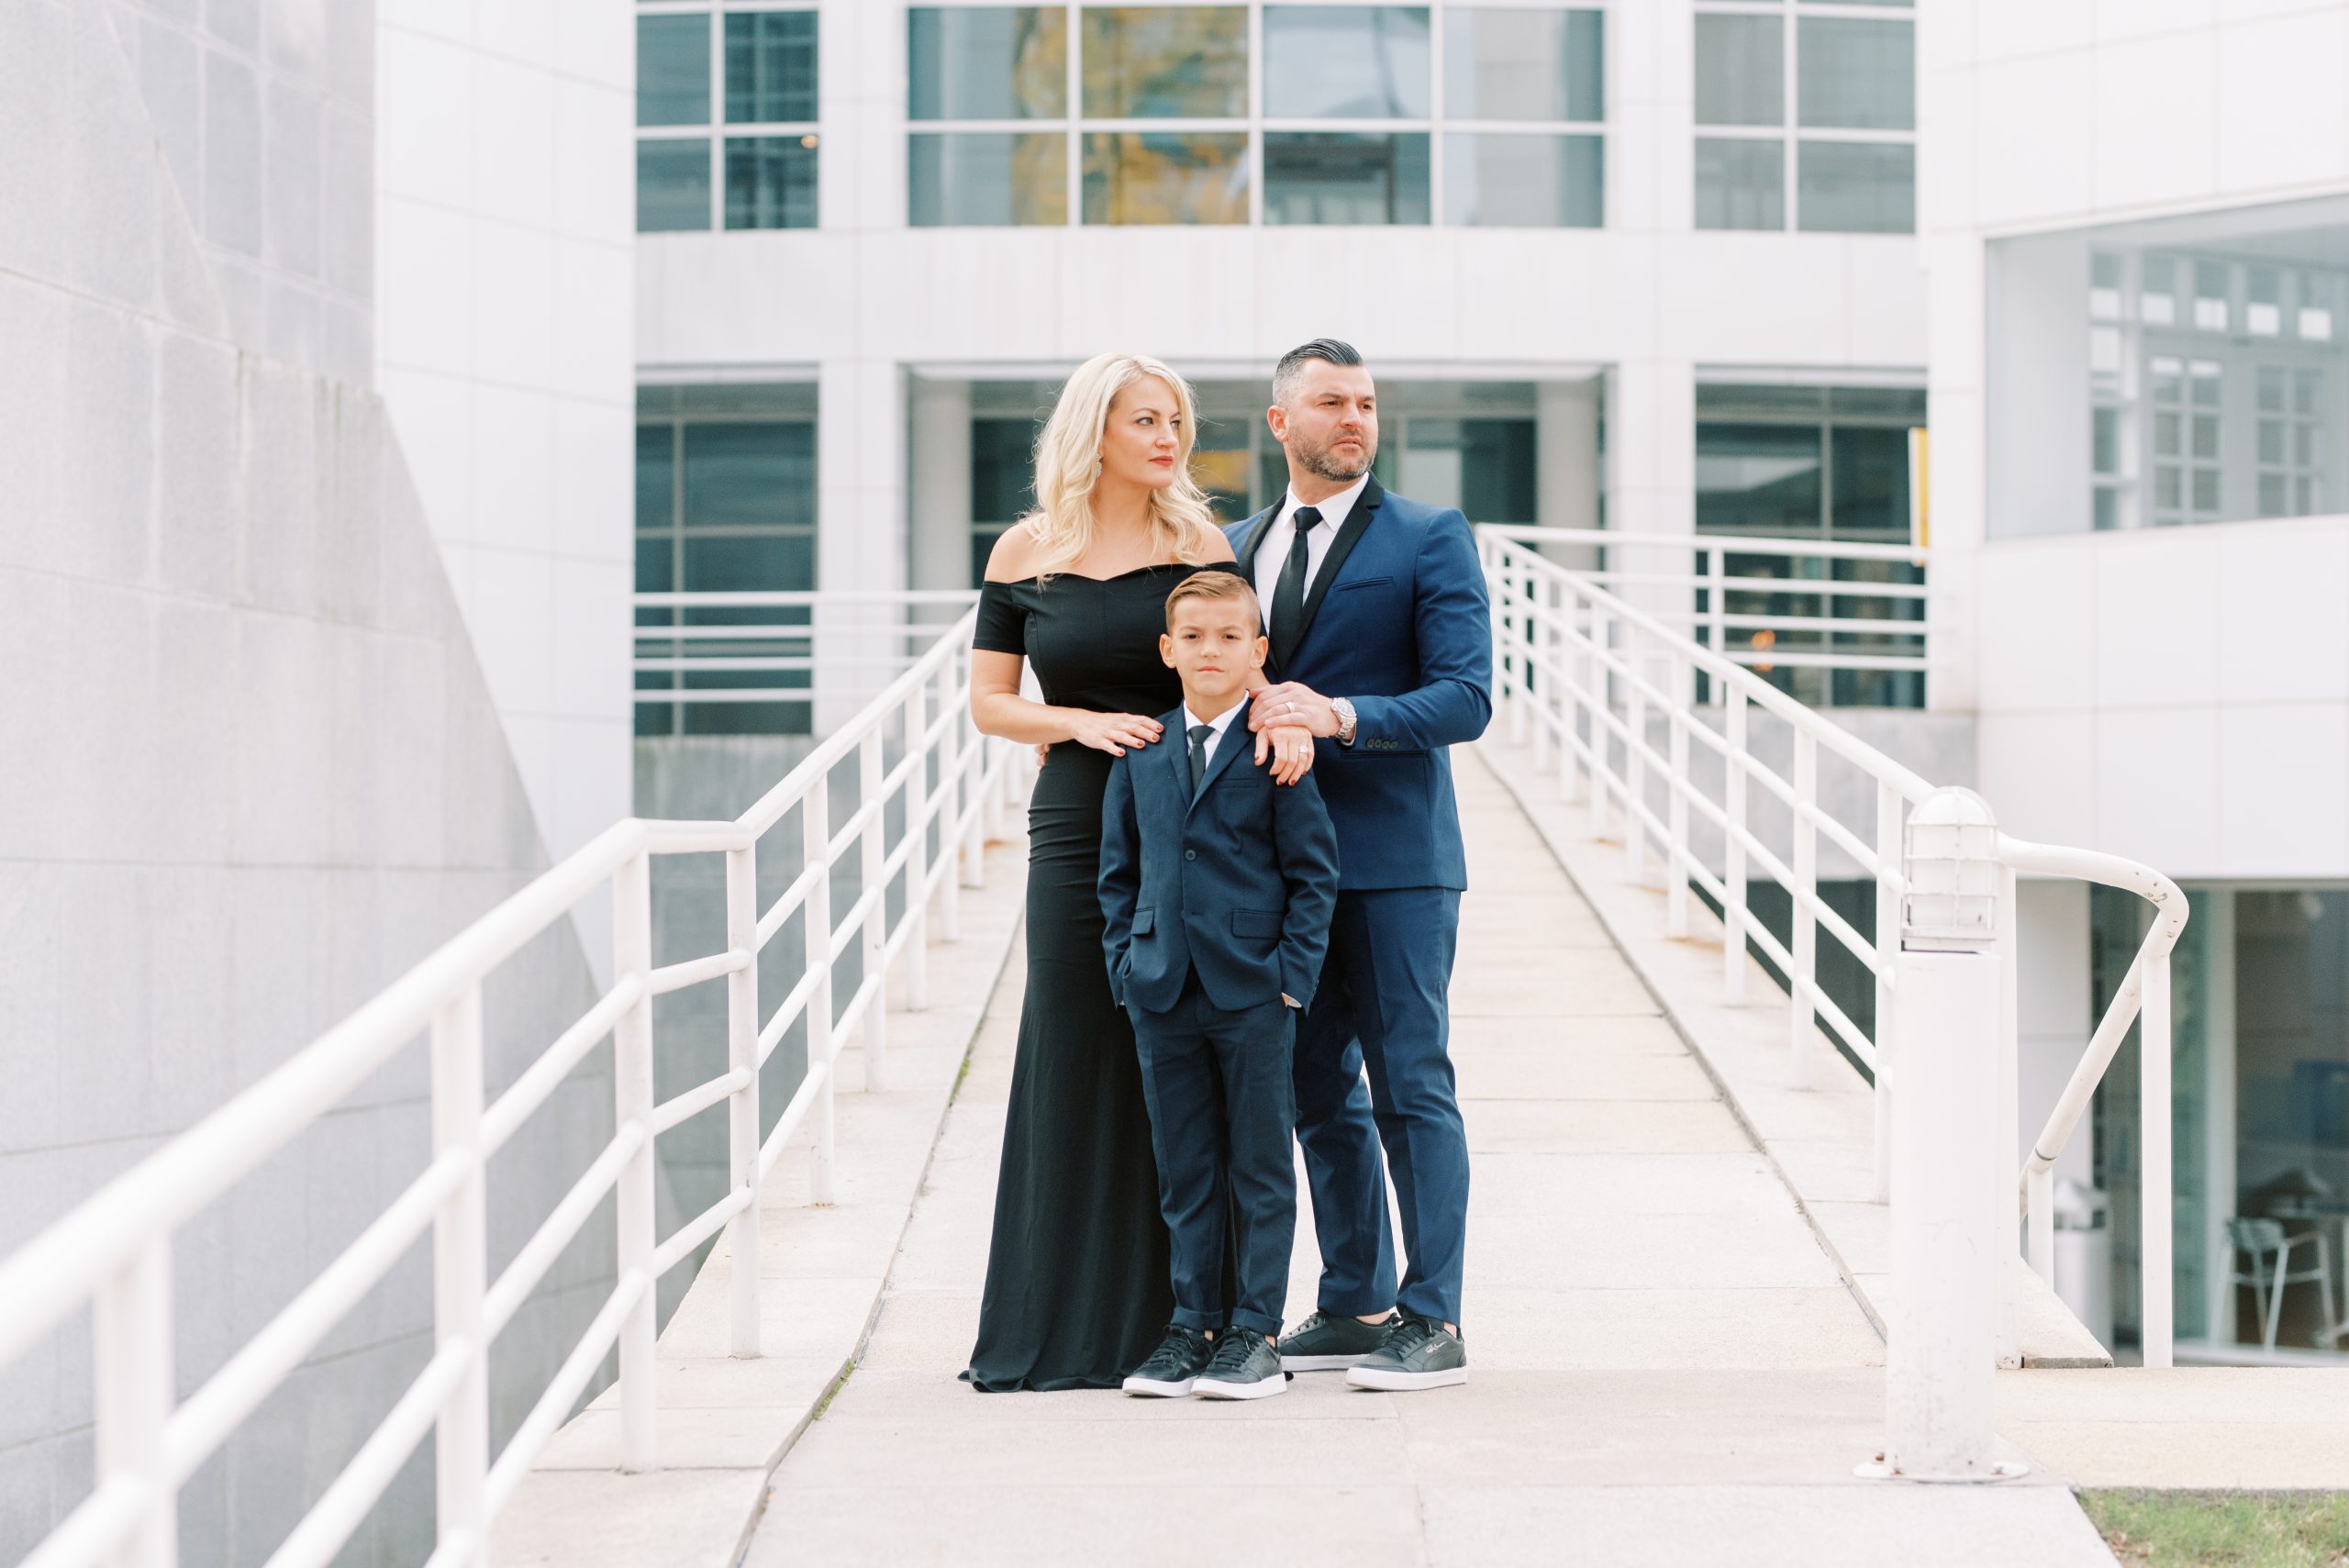 Lindsey Powell Photography, High Museum of Art, Chic Family Session, Atlanta Family Photographer, Marietta Family Photography, Vinnings, Buckhead, Art, Formal Family Session